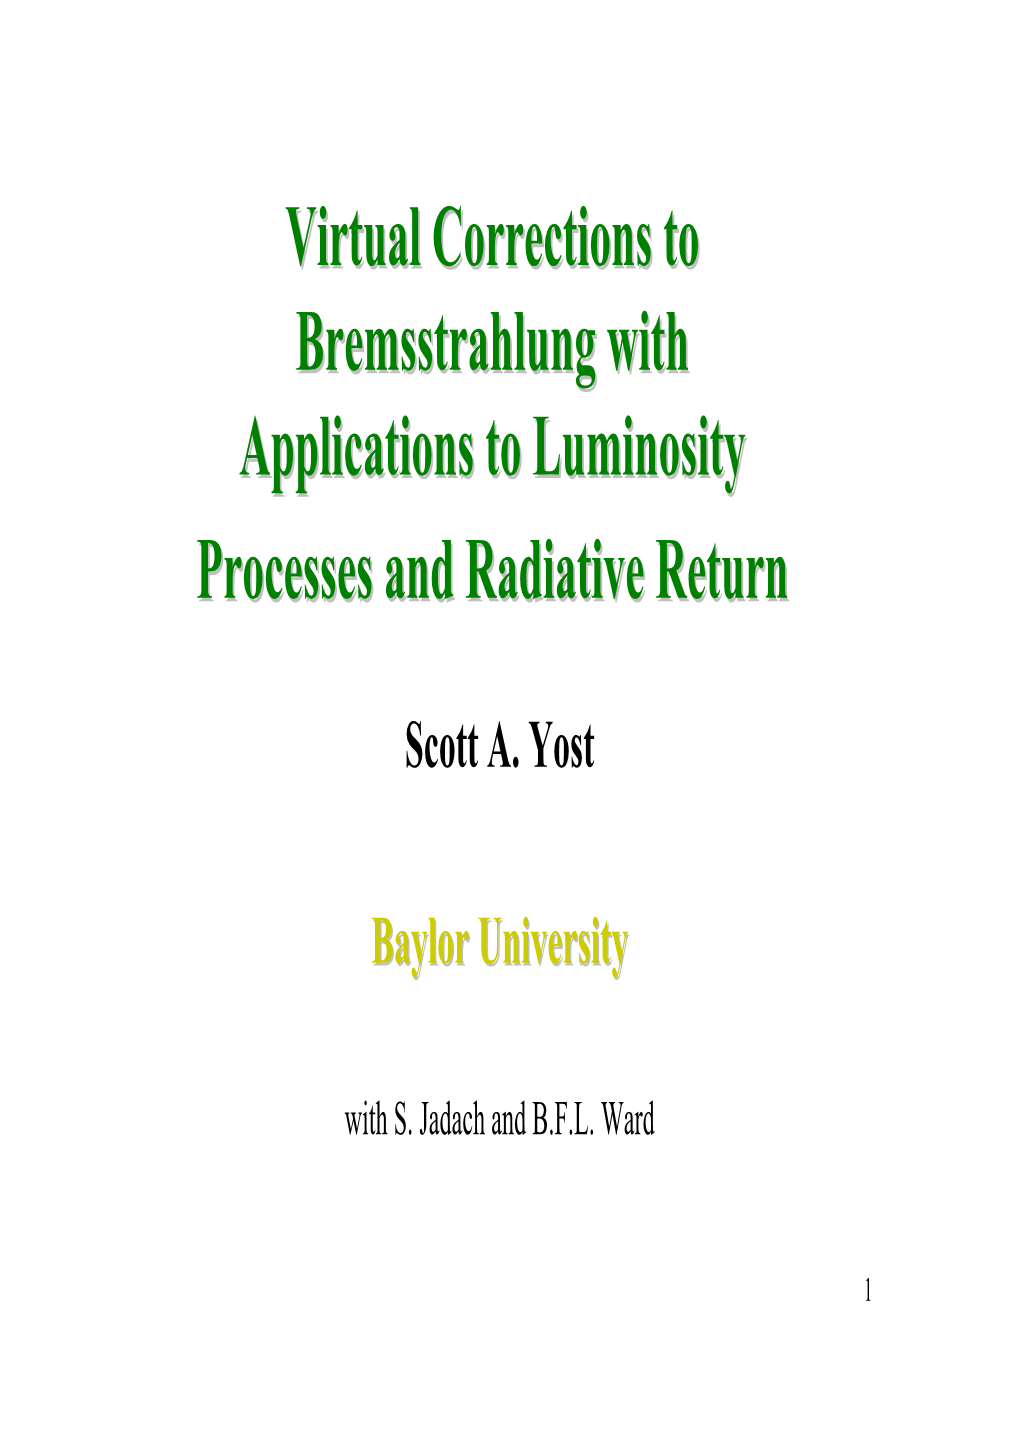 Virtual Corrections to Bremsstrahlung with Applications To